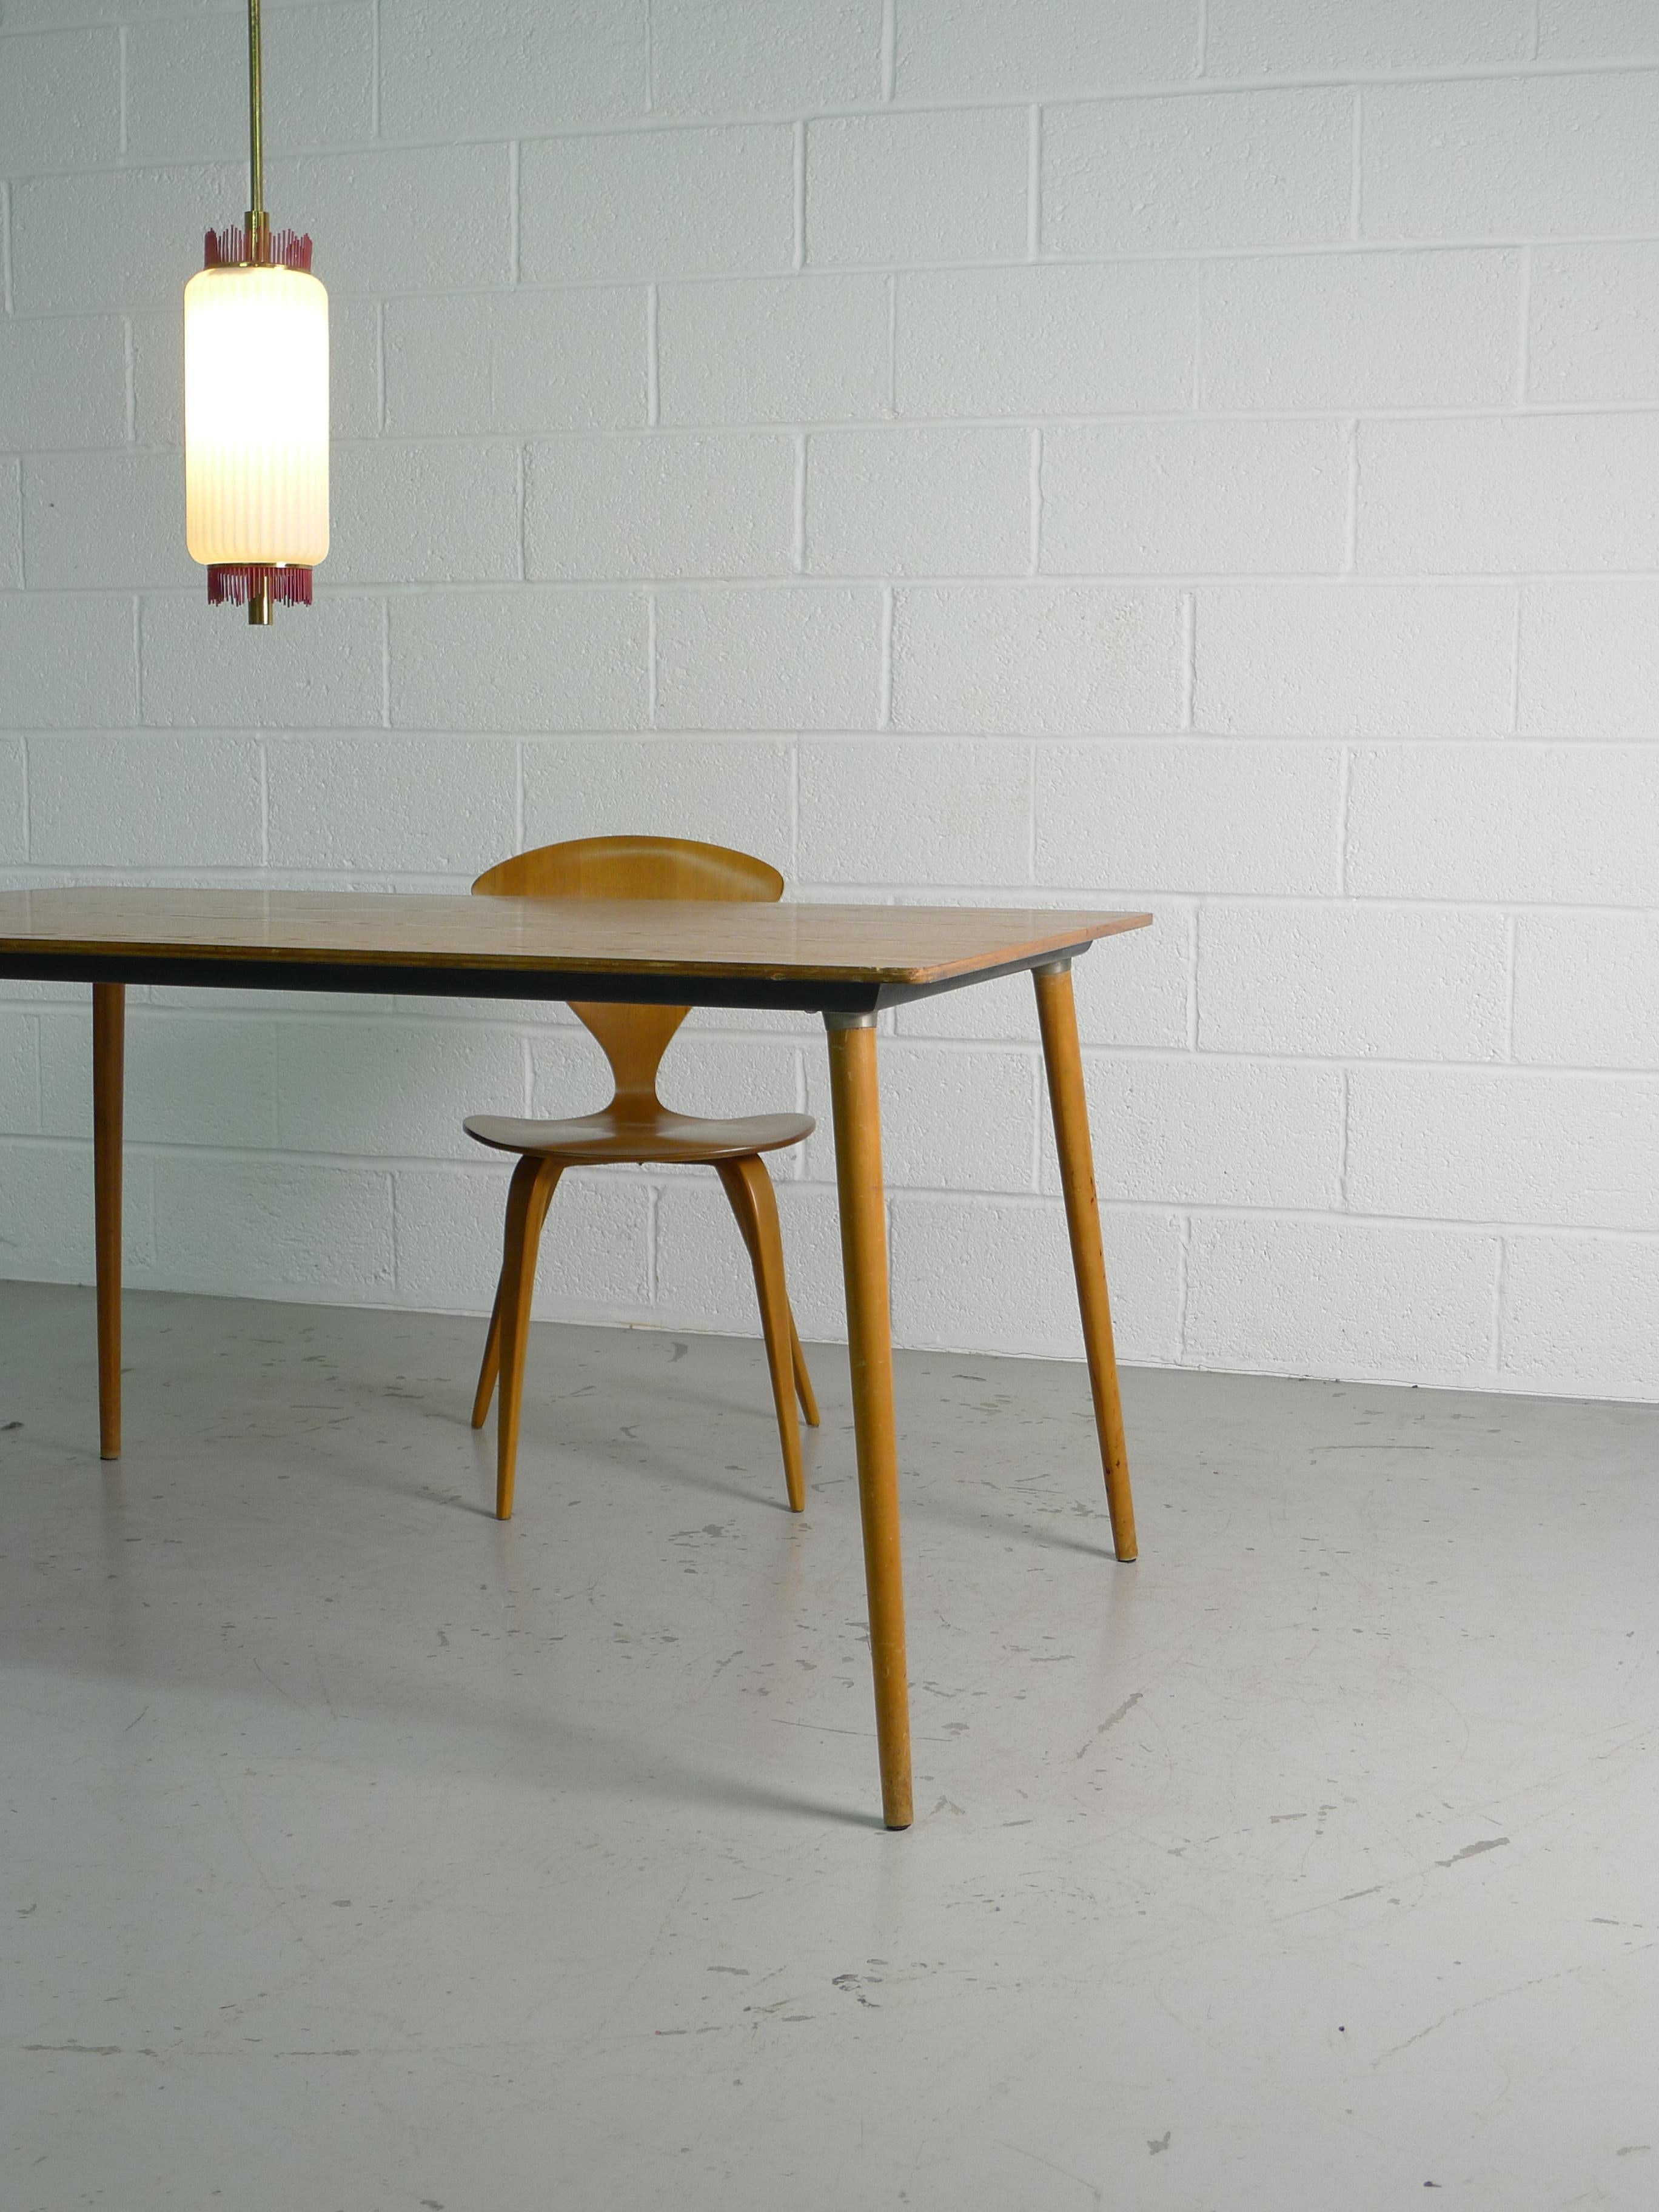 Charles and Ray Eames Dining Table DTM-3 in Walnut, circa 1950, Herman Miller 1